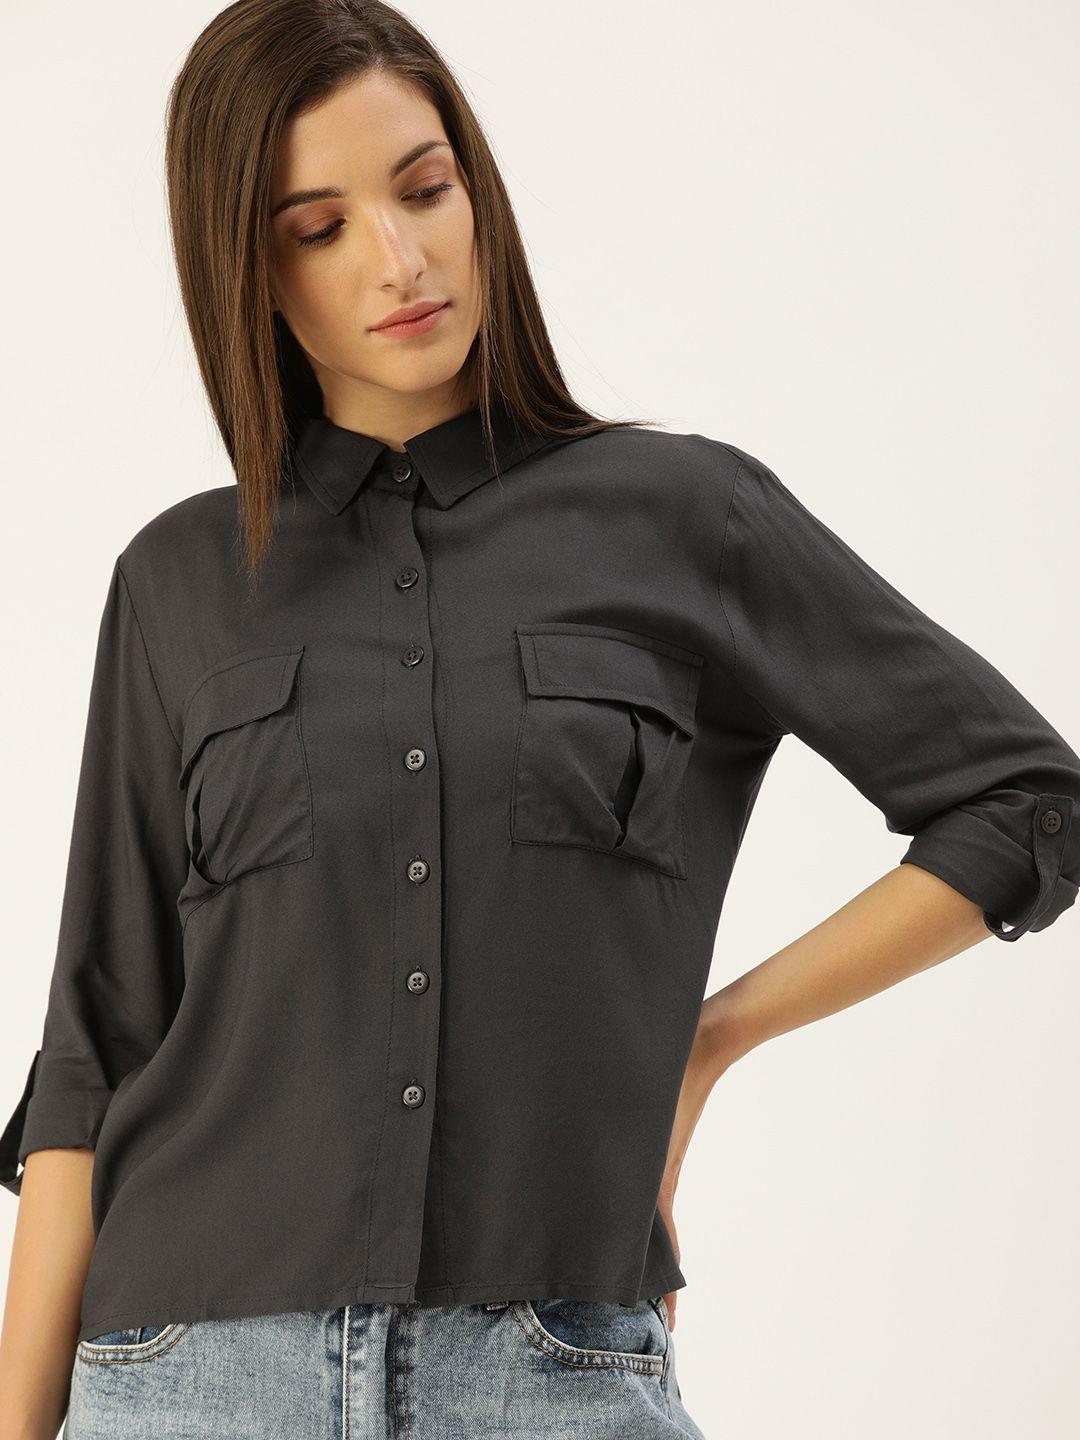 flying-machine-charcoal-roll-up-sleeves-shirt-style-top